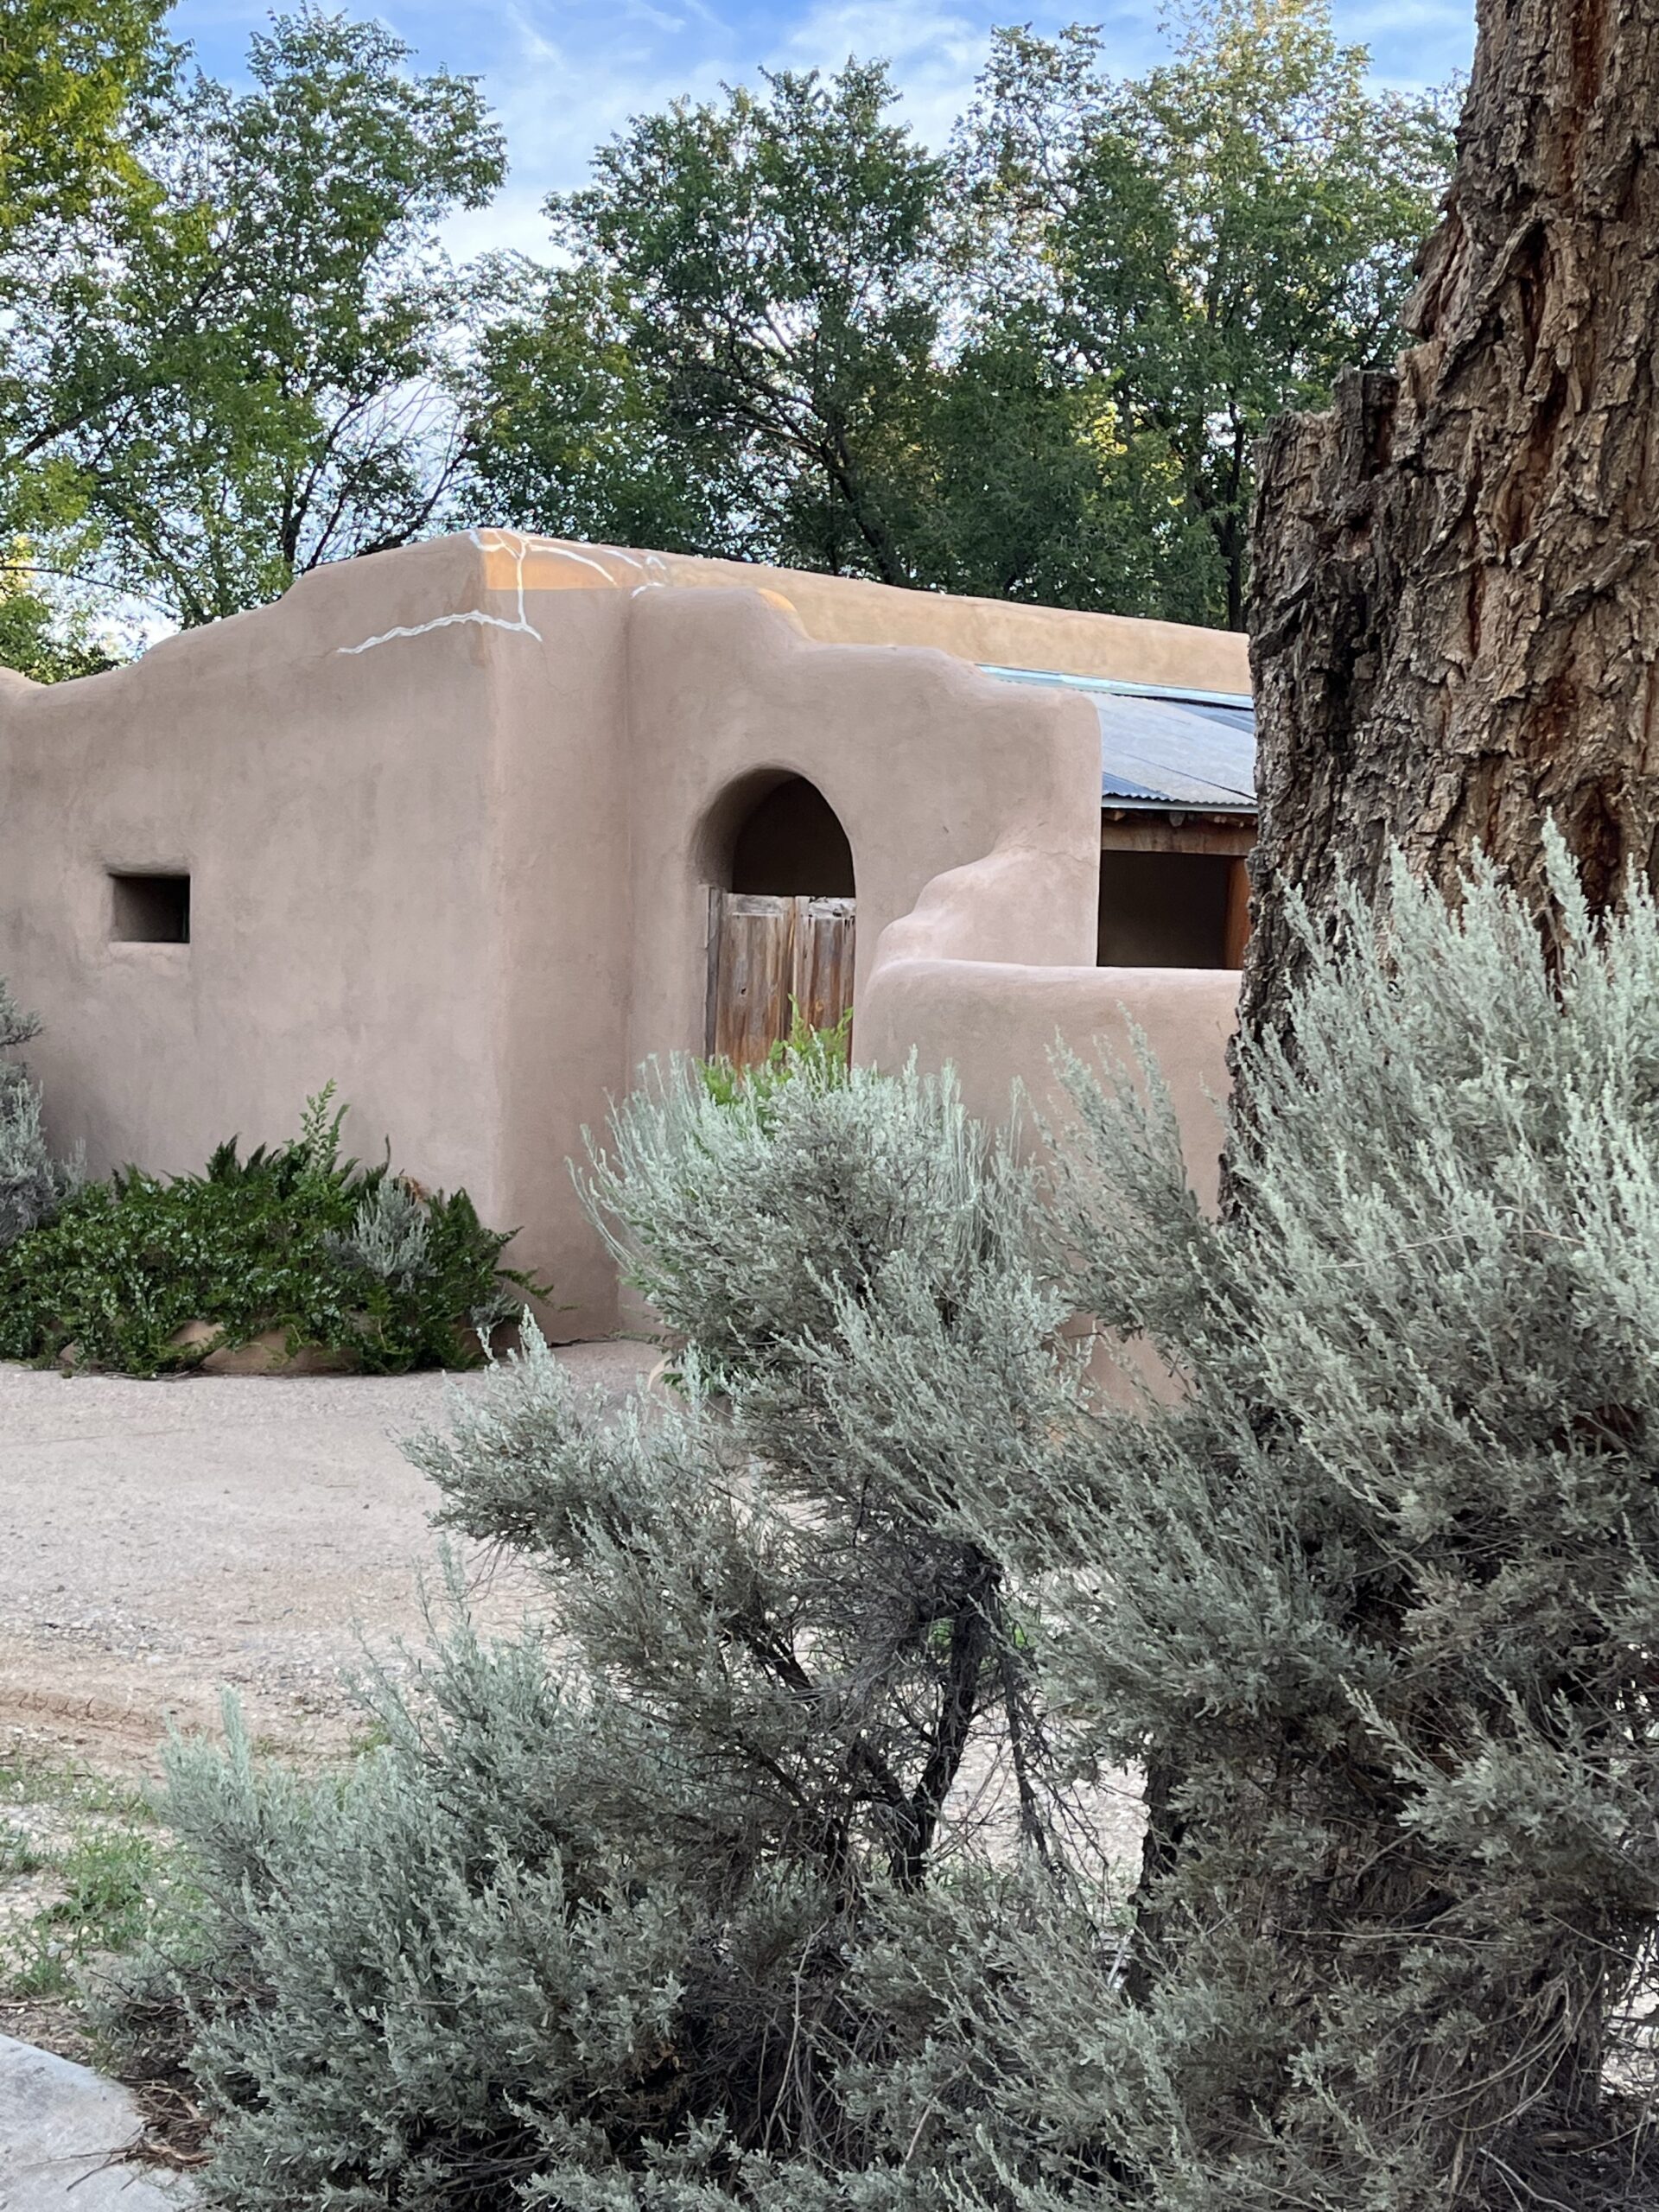 A Guide to Visiting Taos, New Mexico